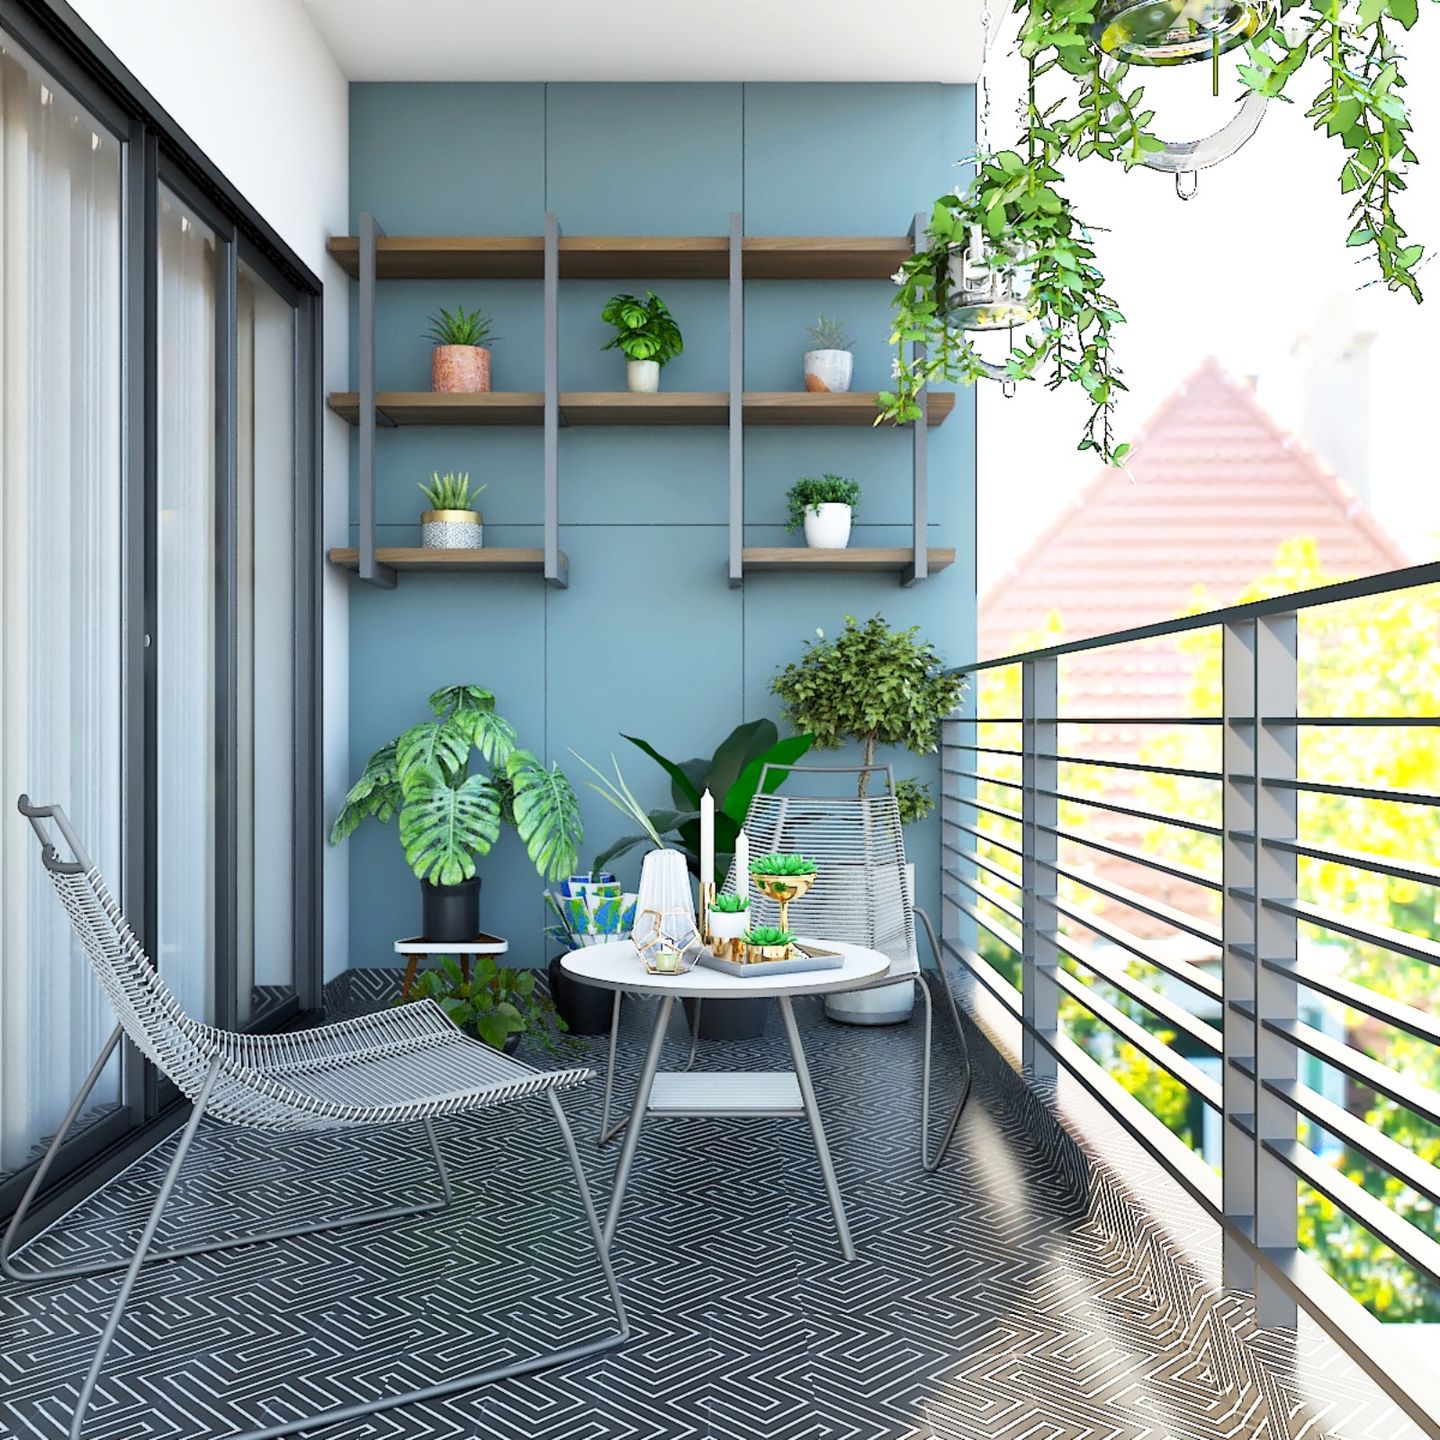 Contemporary Balcony Design with Blue Accent Wall, Floating Ledges, Black and White Abstract Flooring, White Rattan Furniture, and Round Table - Livspace